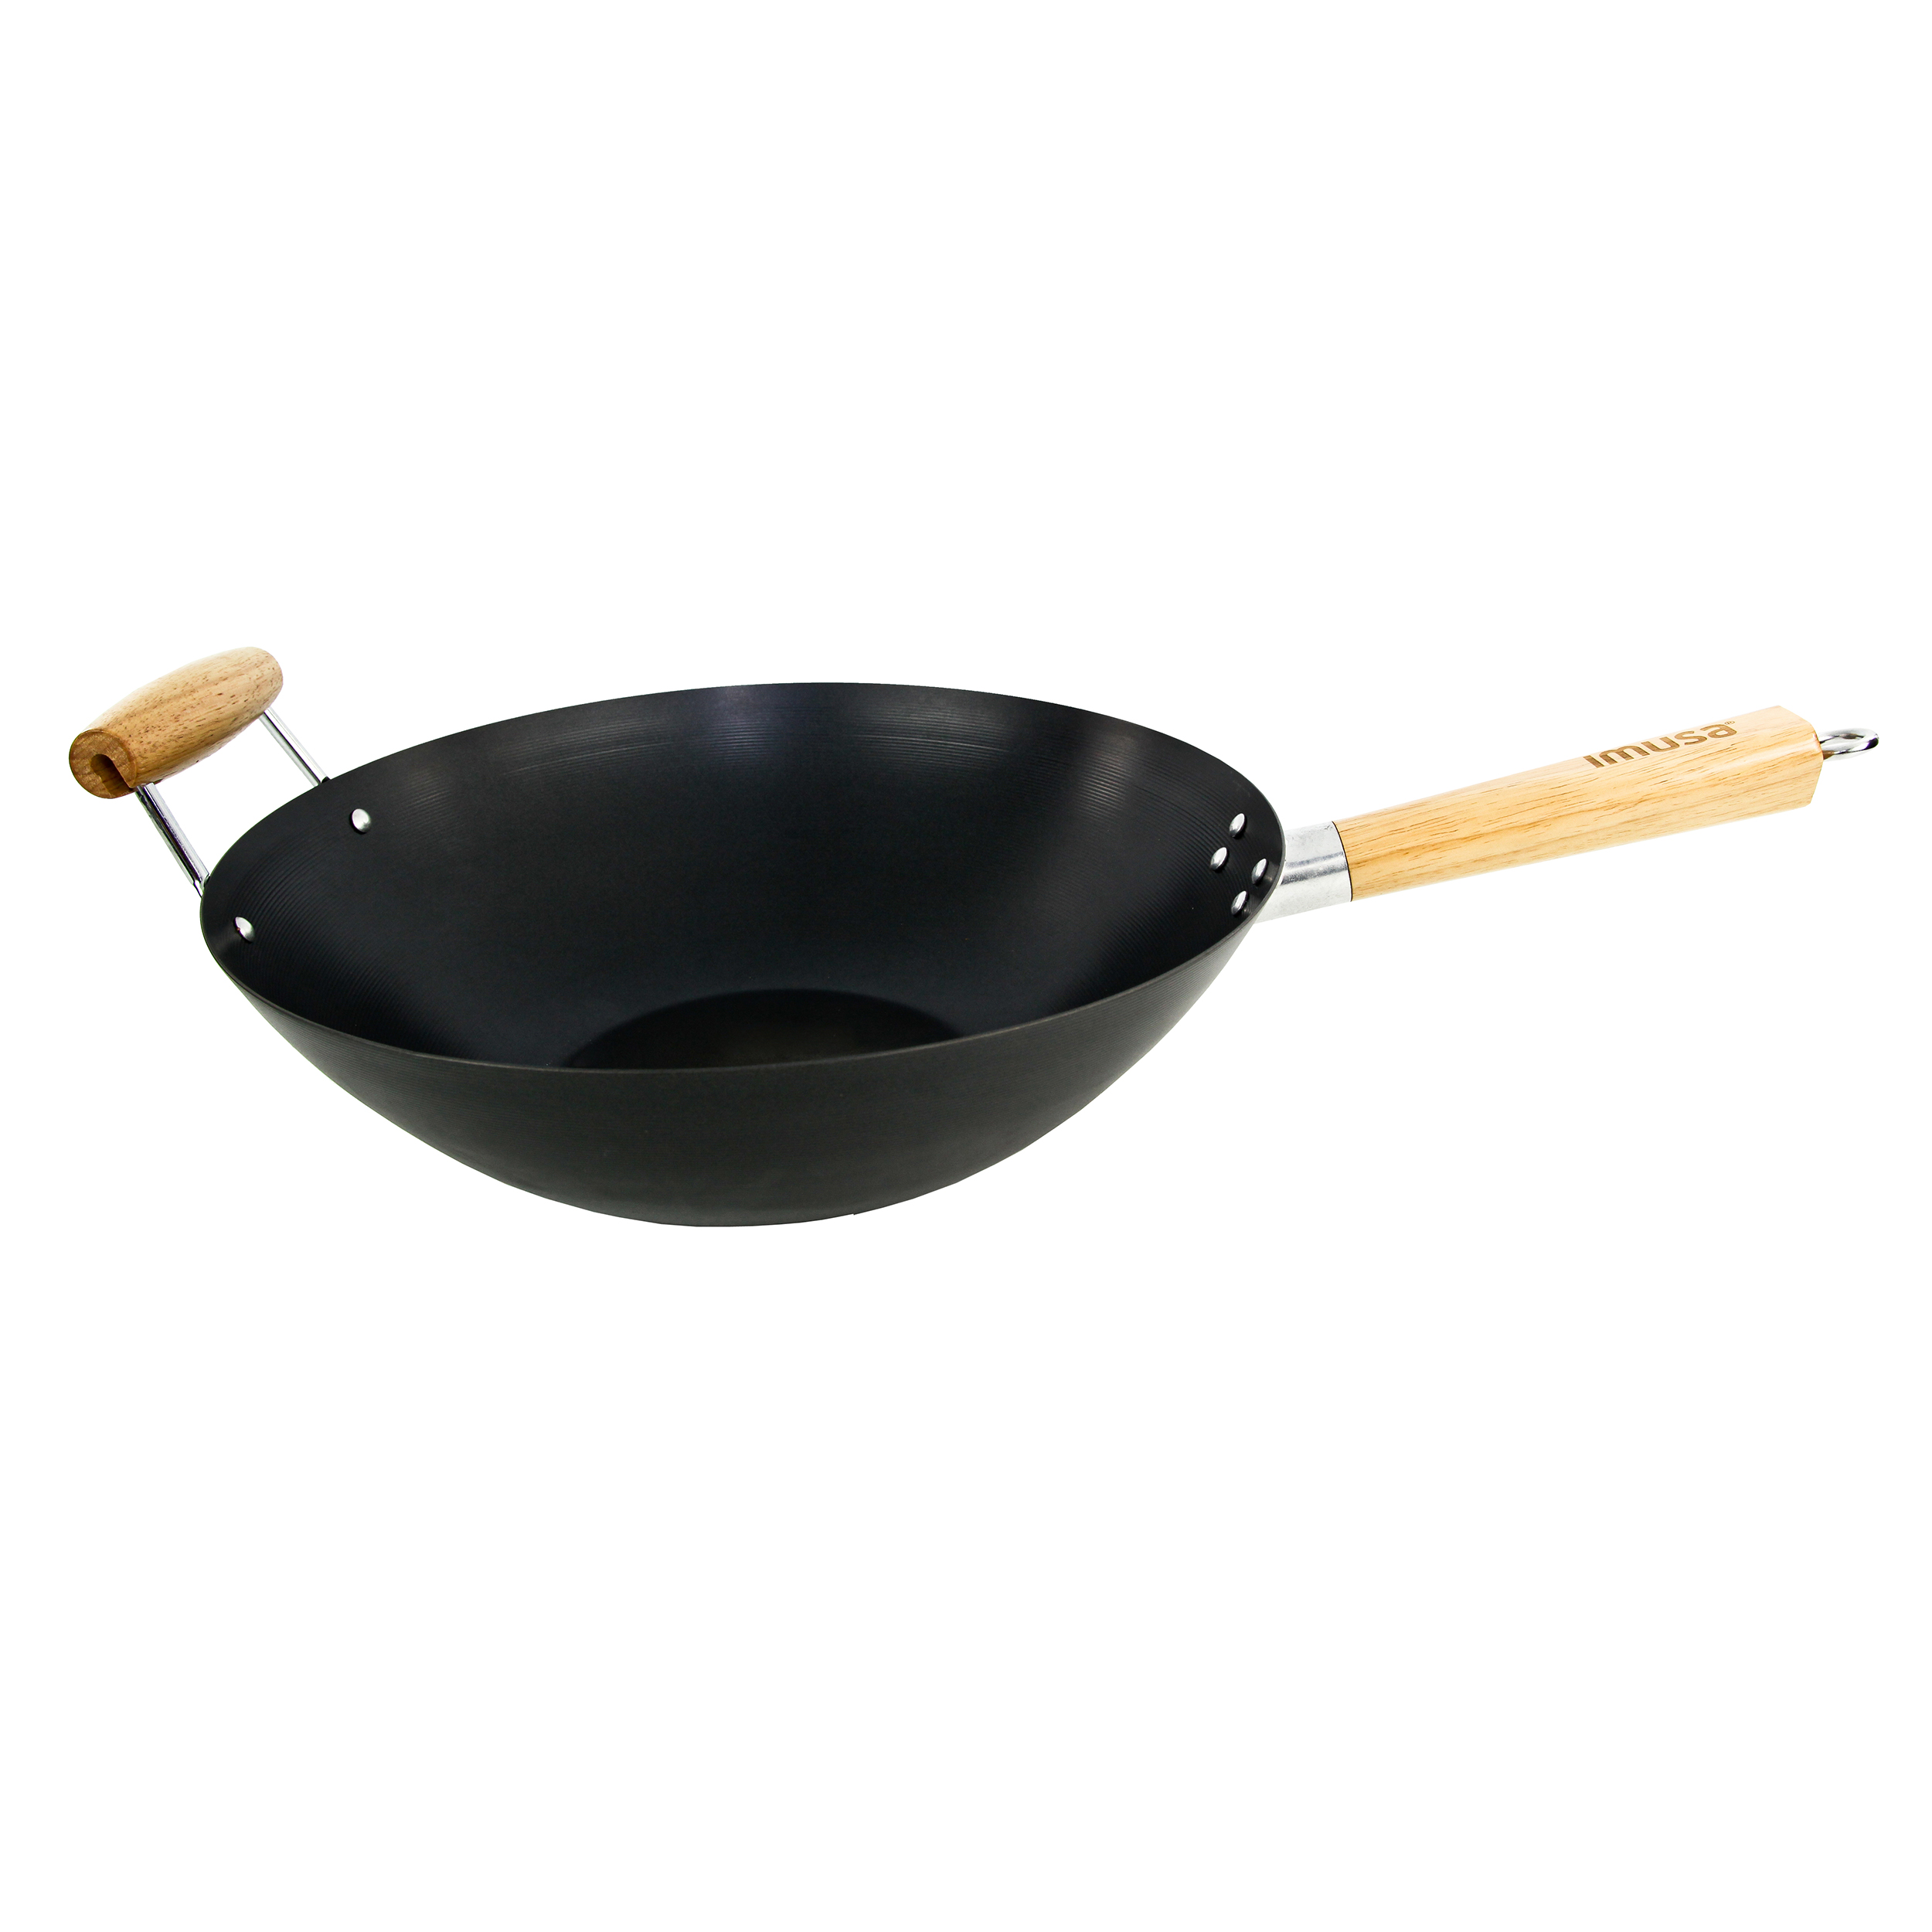 Chinese black iron Steel authentic Wok Pan with Wooden Handle and wok ring 